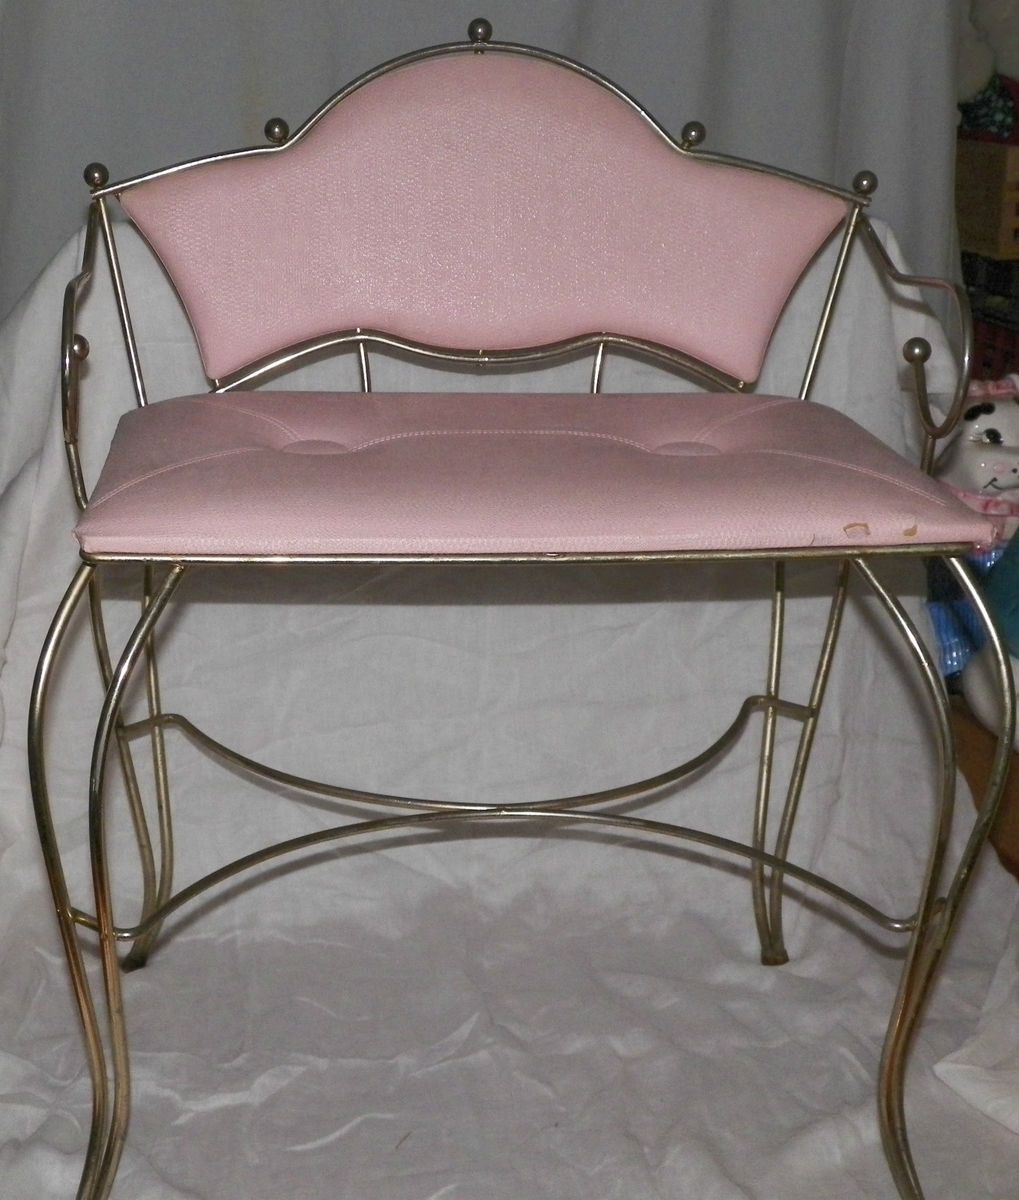 Pearl Wick Corp. Long Island City NY Pink Vanity Seat Vintage